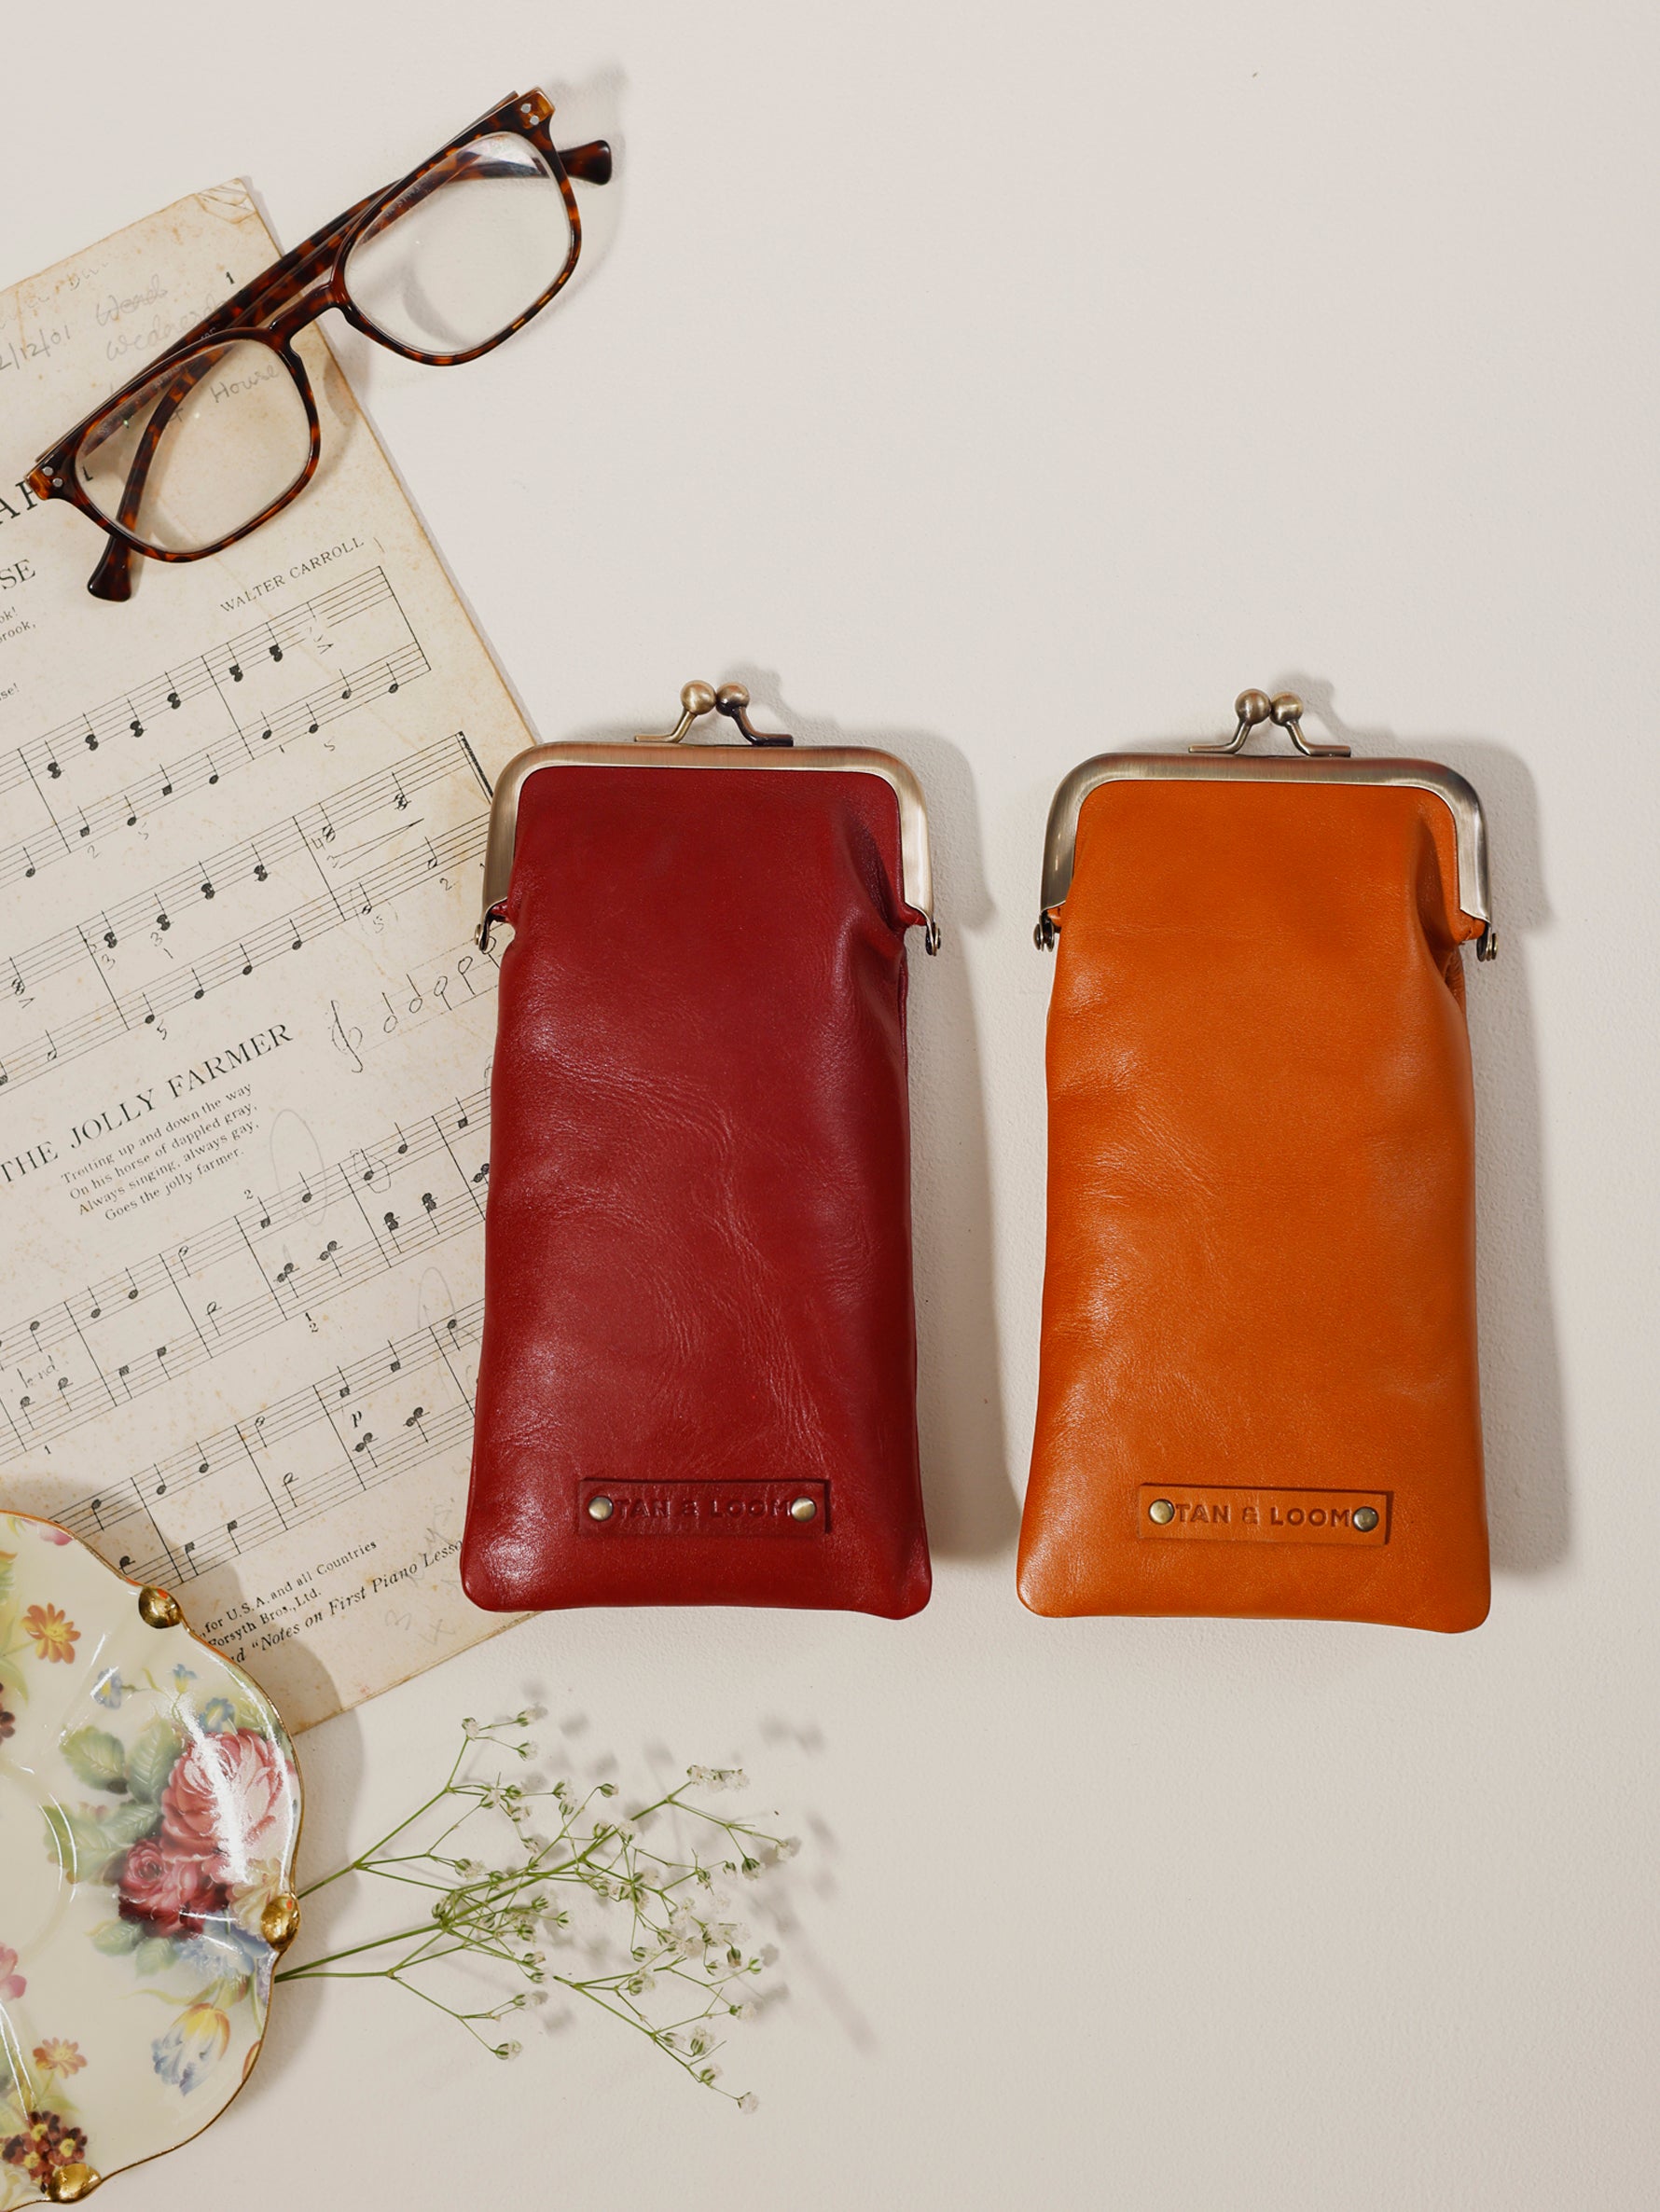 Handcrafted Genuine Vegetable Tanned Leather Reader's Case Burgundy for Women Tan & Loom